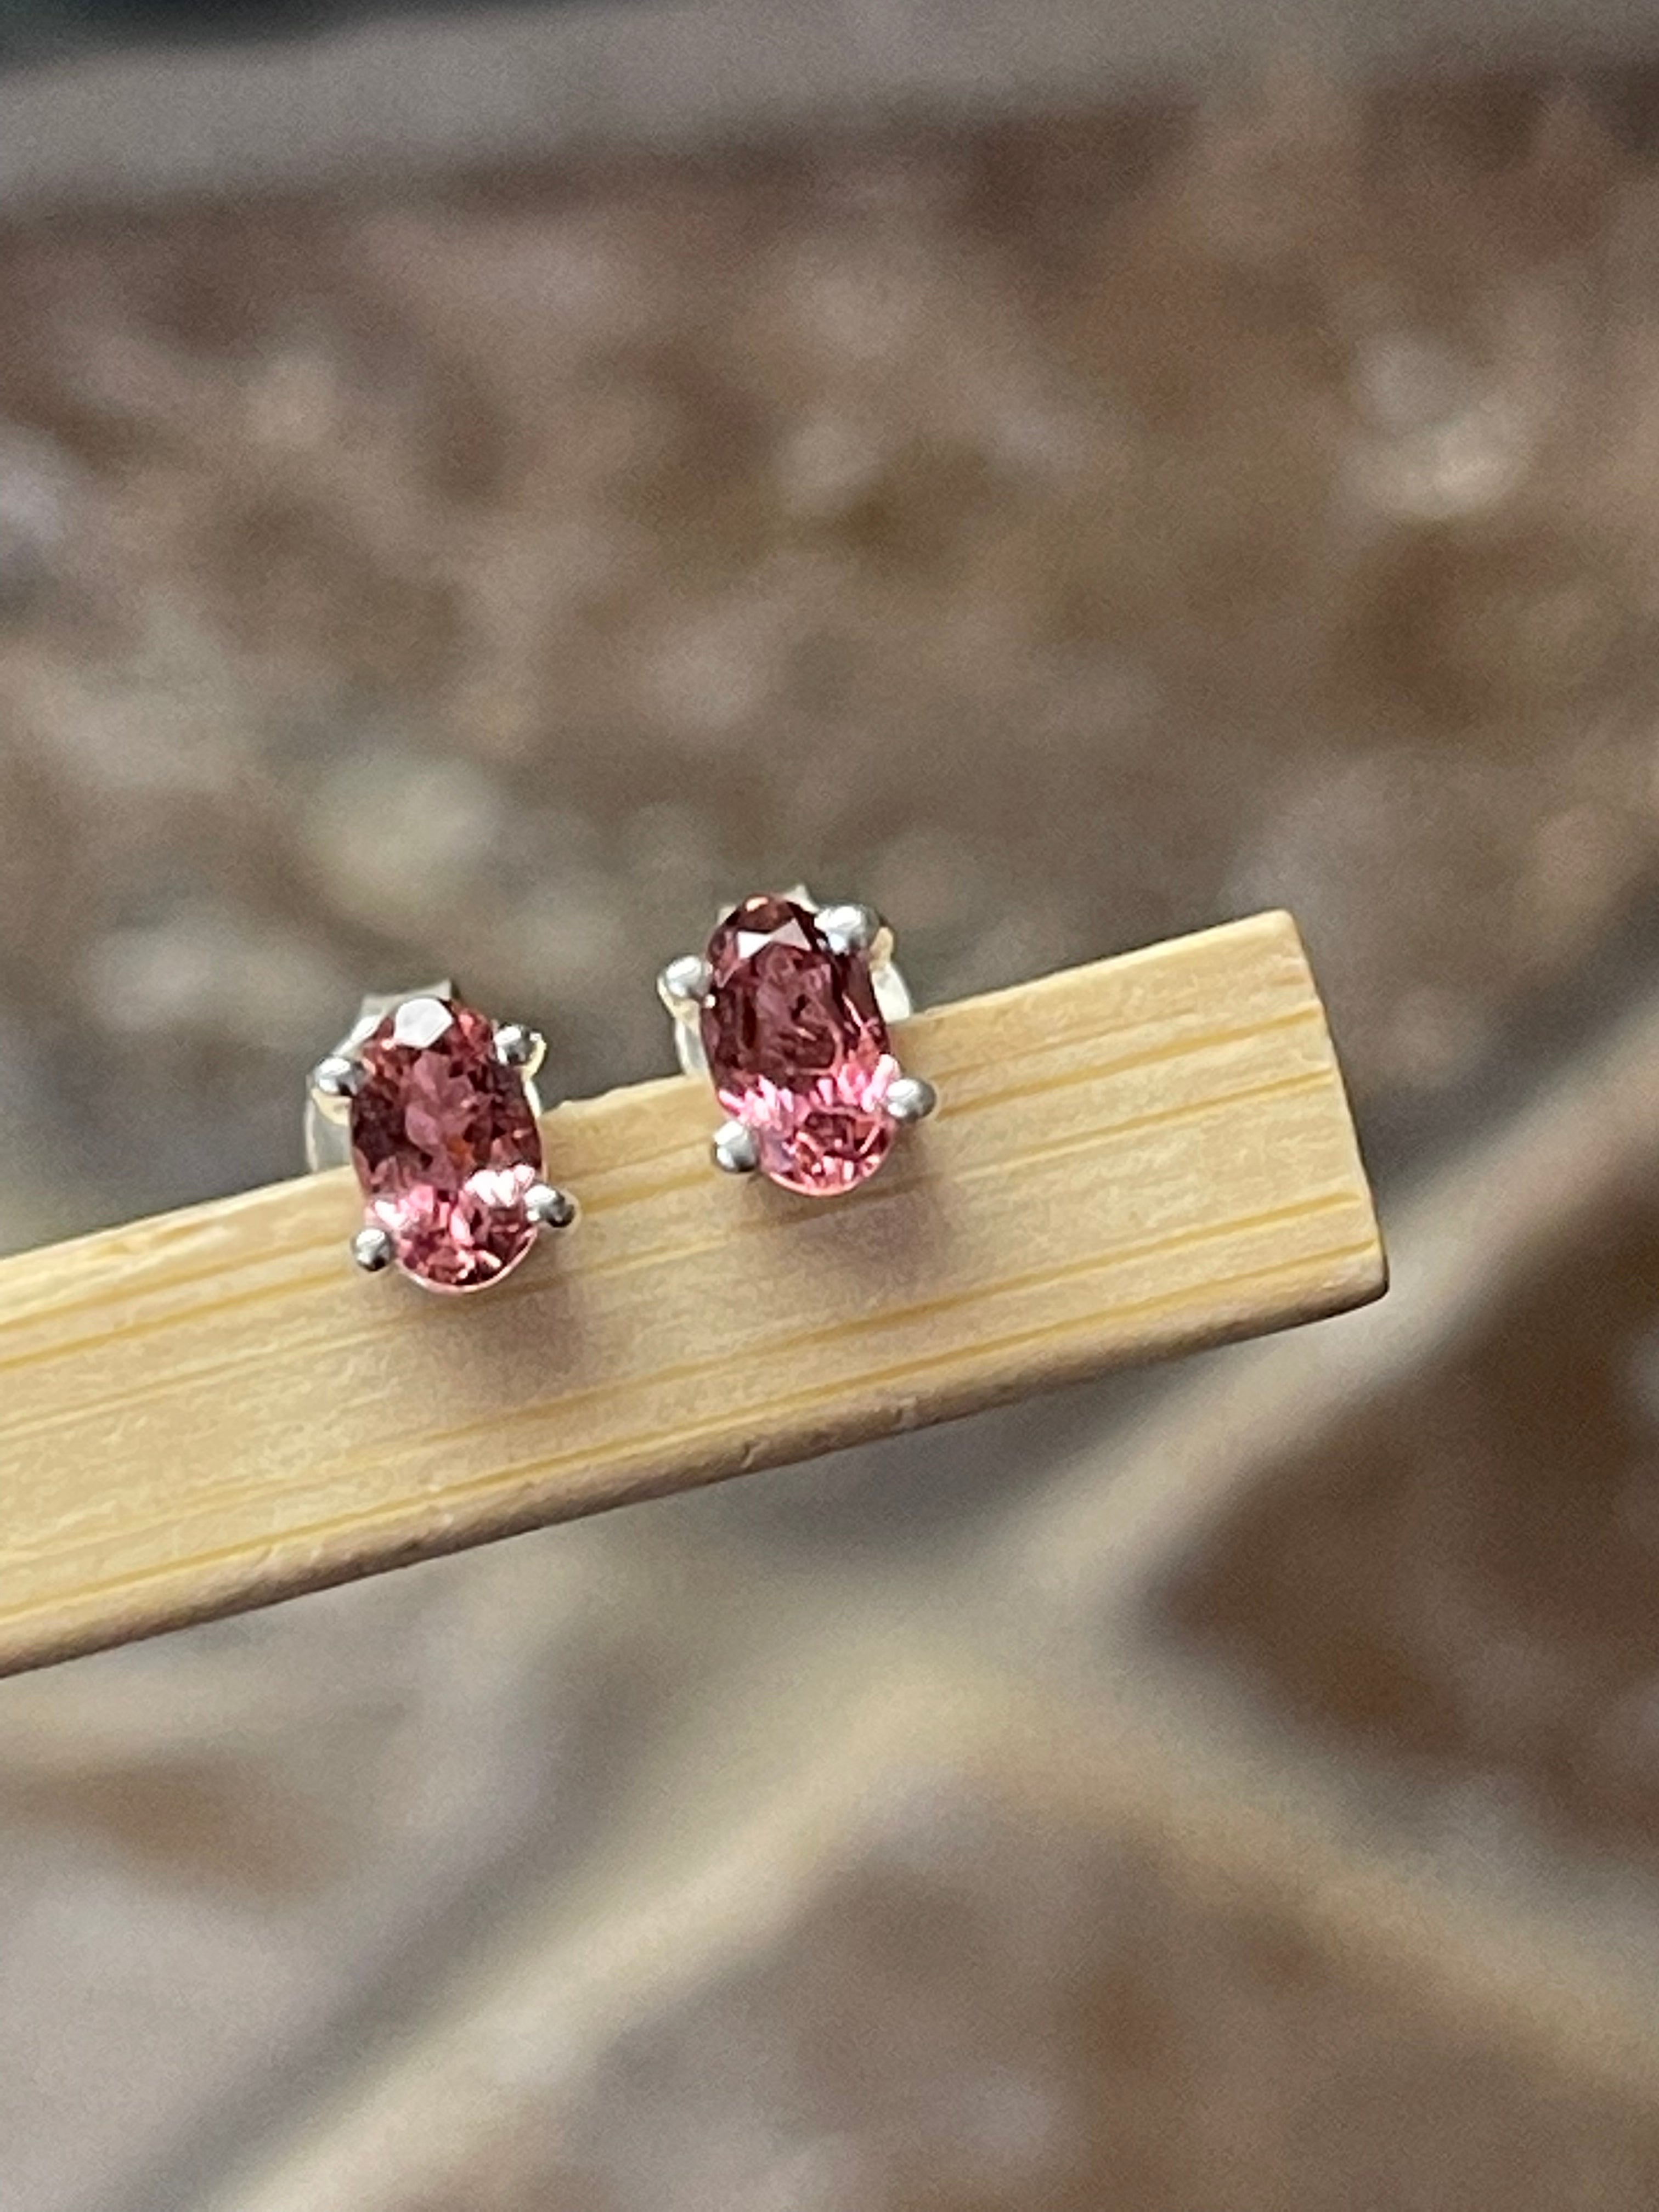 Natural Pink Tourmaline 925 Solid Sterling Silver Earrings 6mm - Natural Rocks by Kala